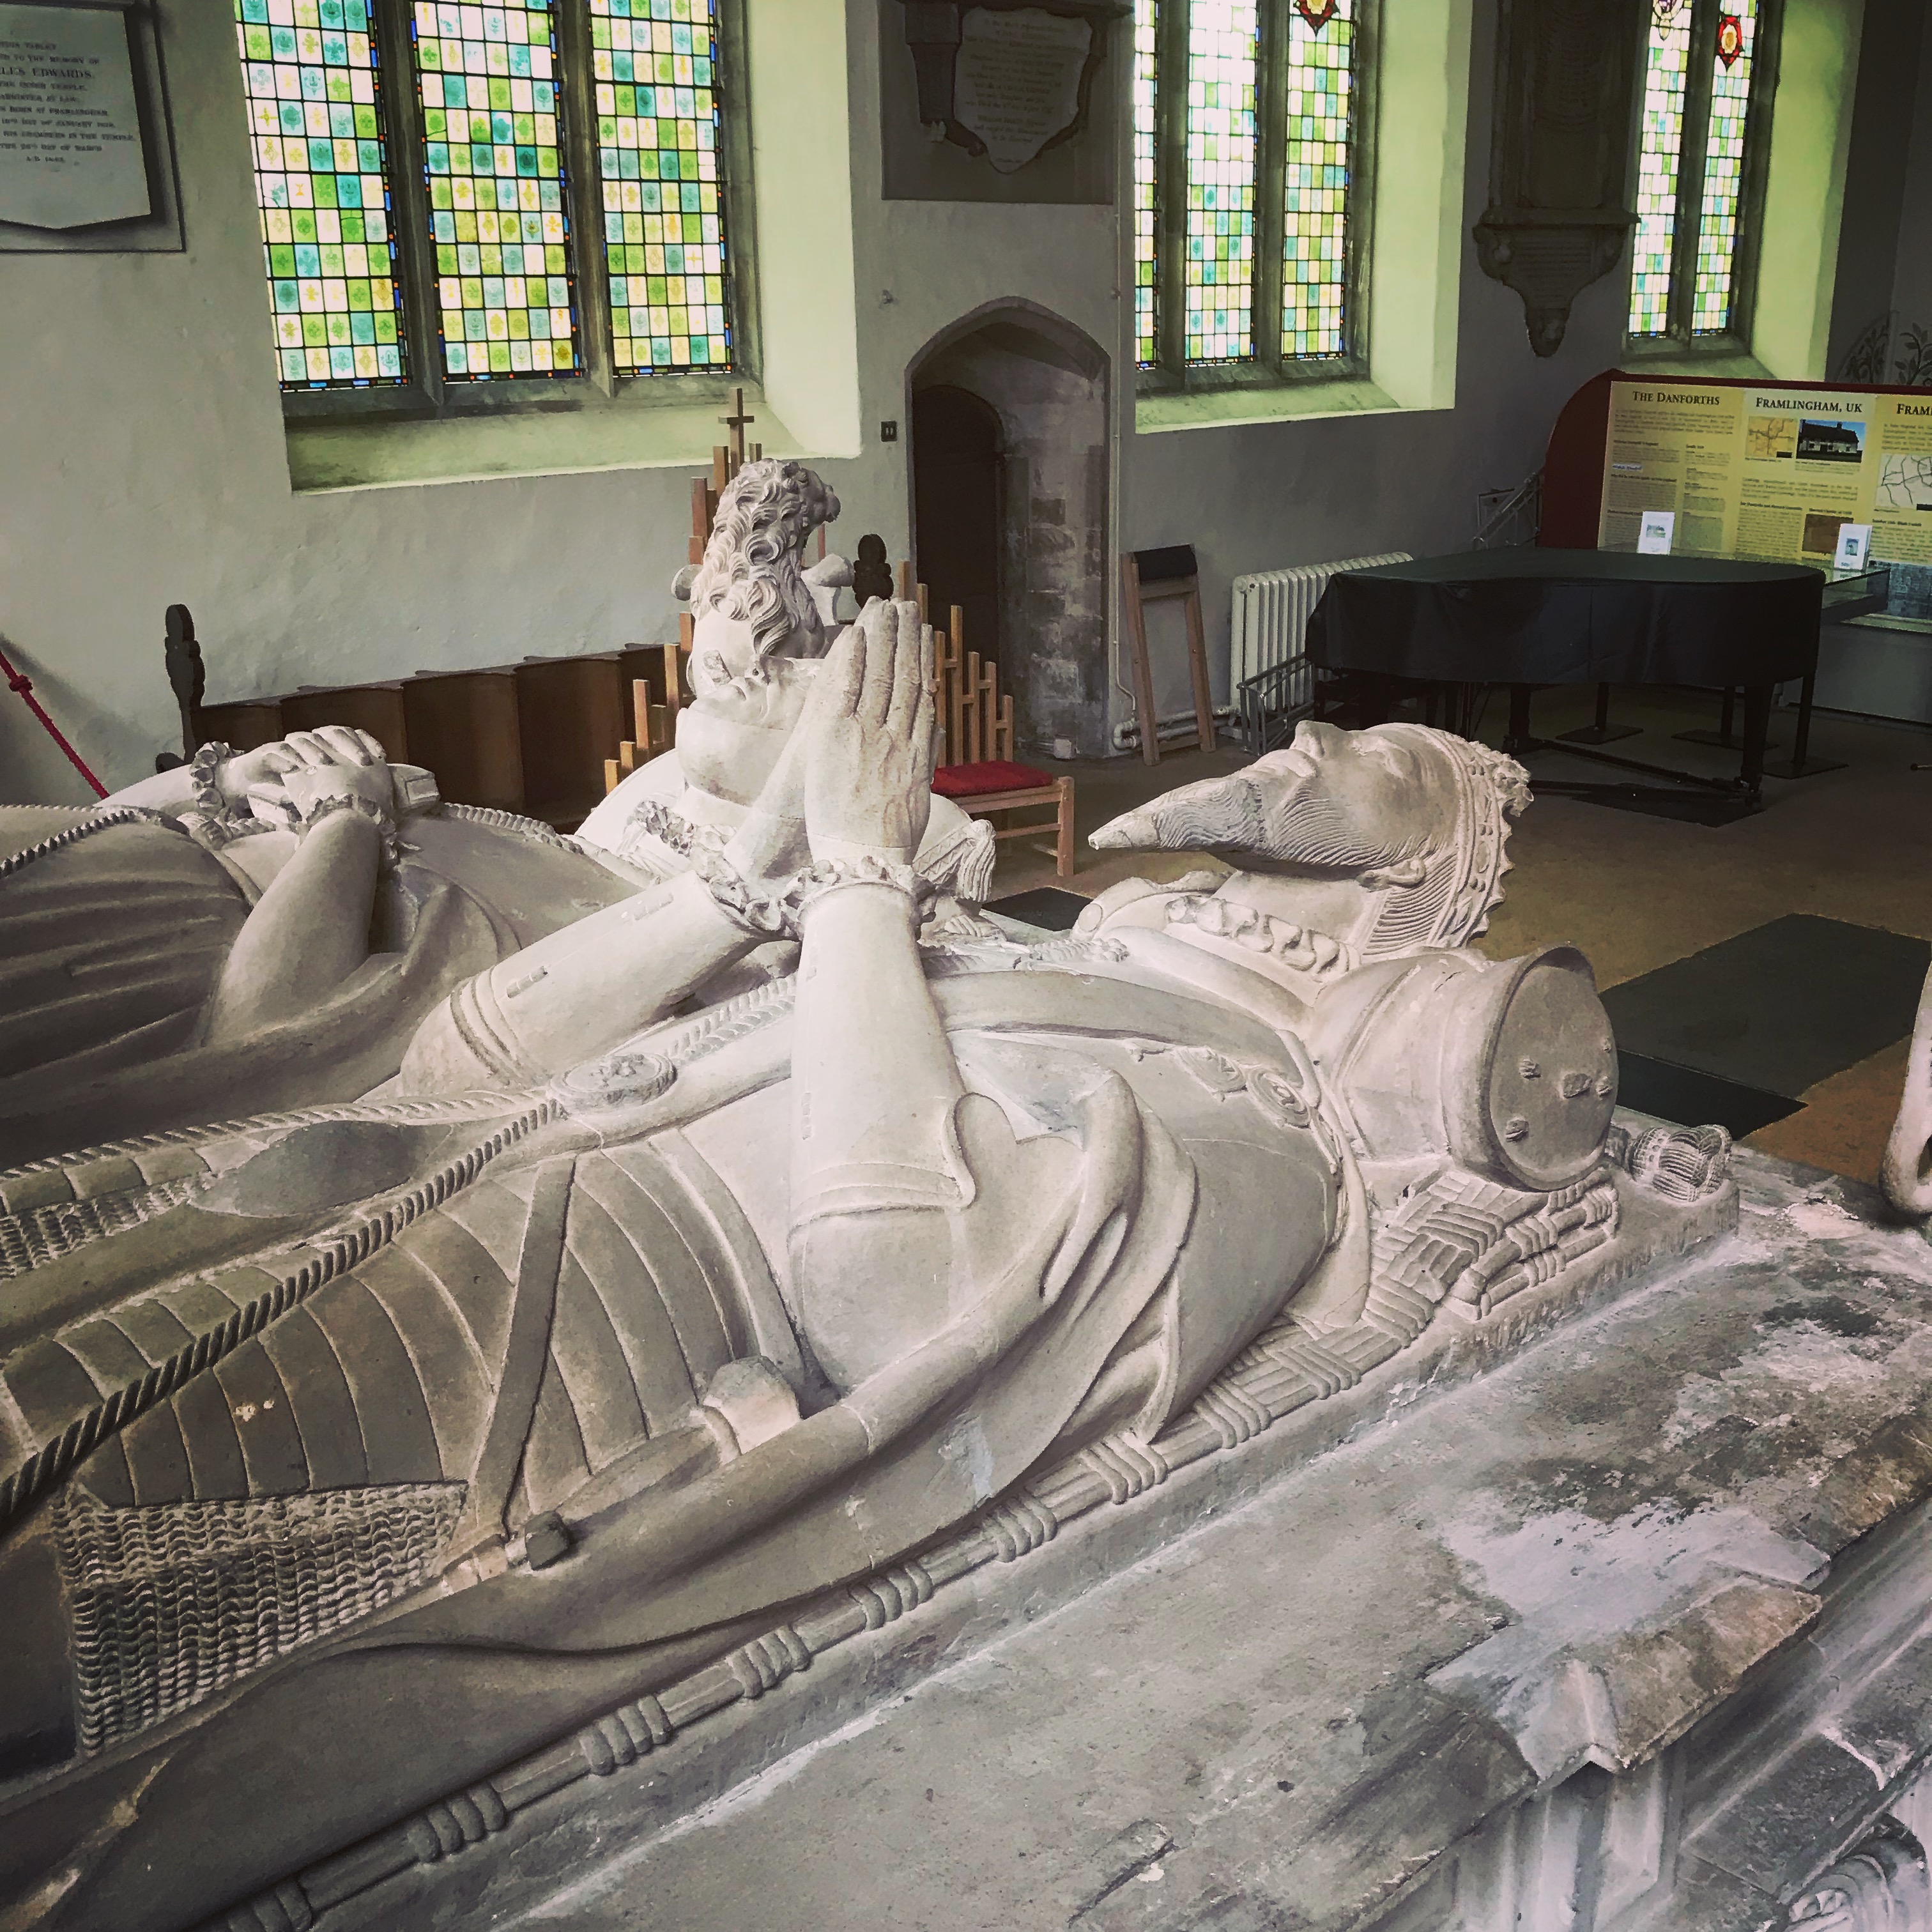 The tomb of Thomas Howard and Anne Howard